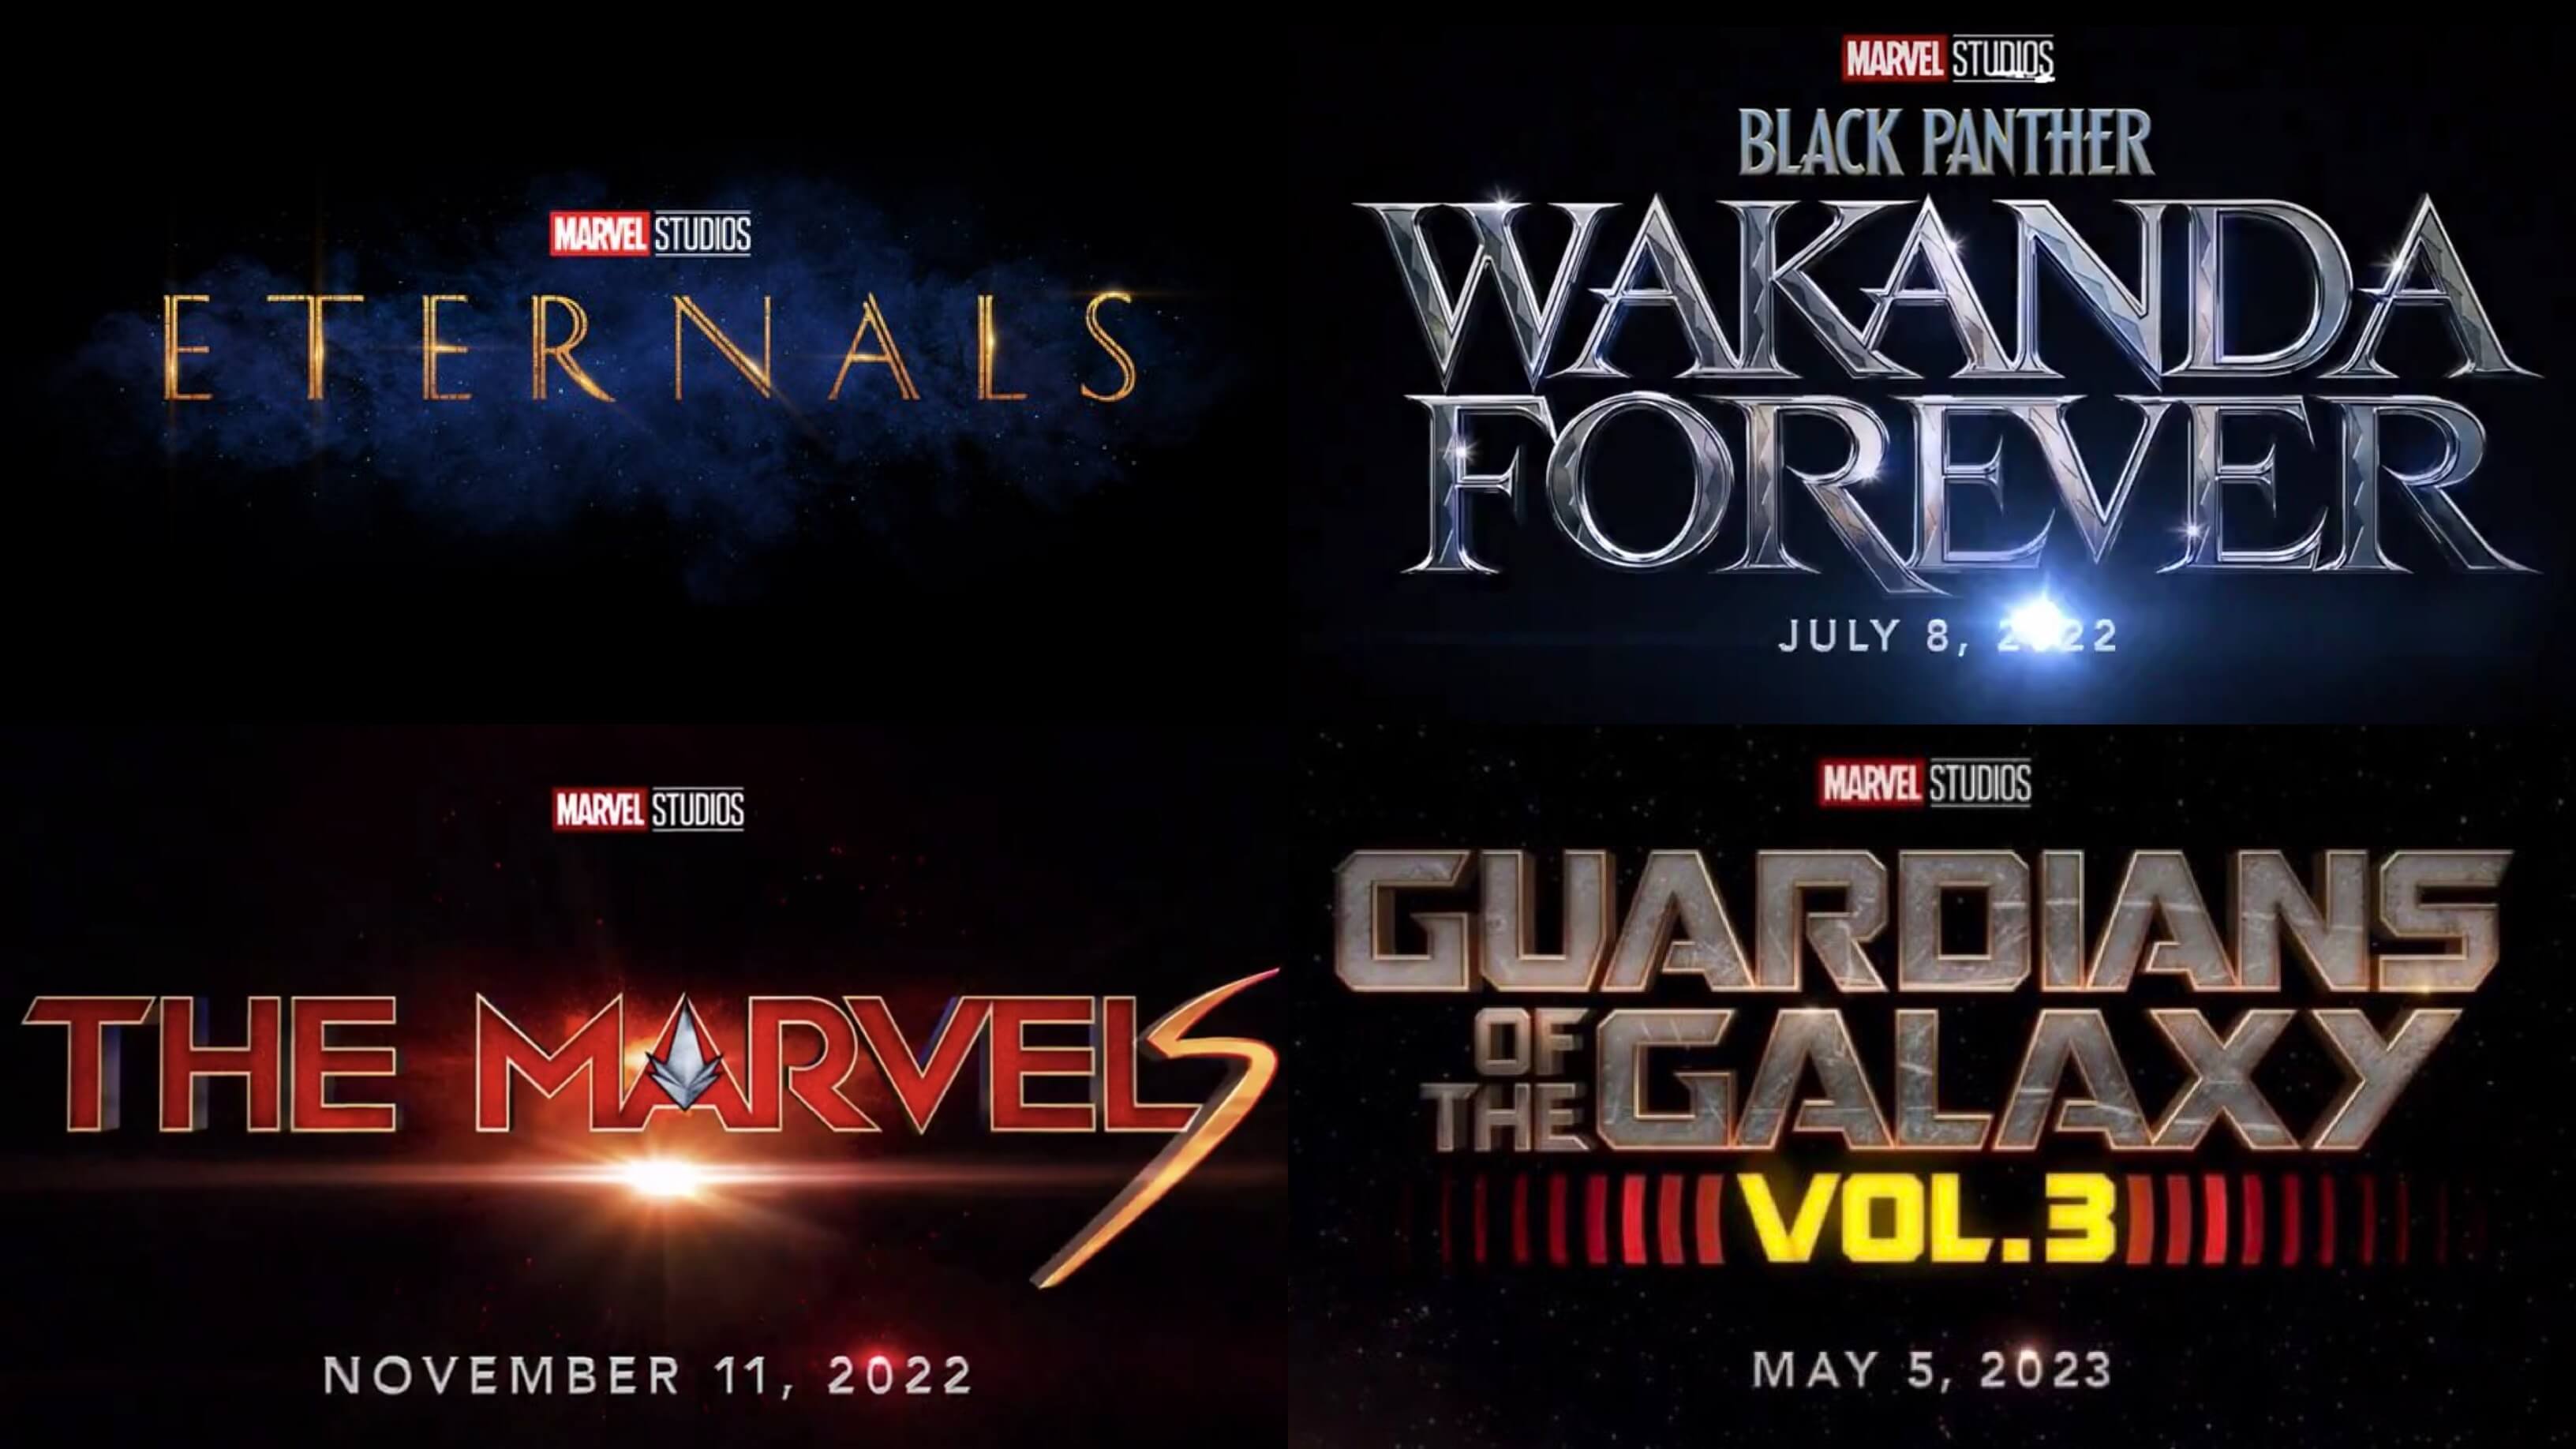 Marvel Studios Montage Features a First Look of ‘Eternals’ and Official Title Reveals For ‘Black Panther: Wakanda Forever’ and ‘The Marvels’ and More